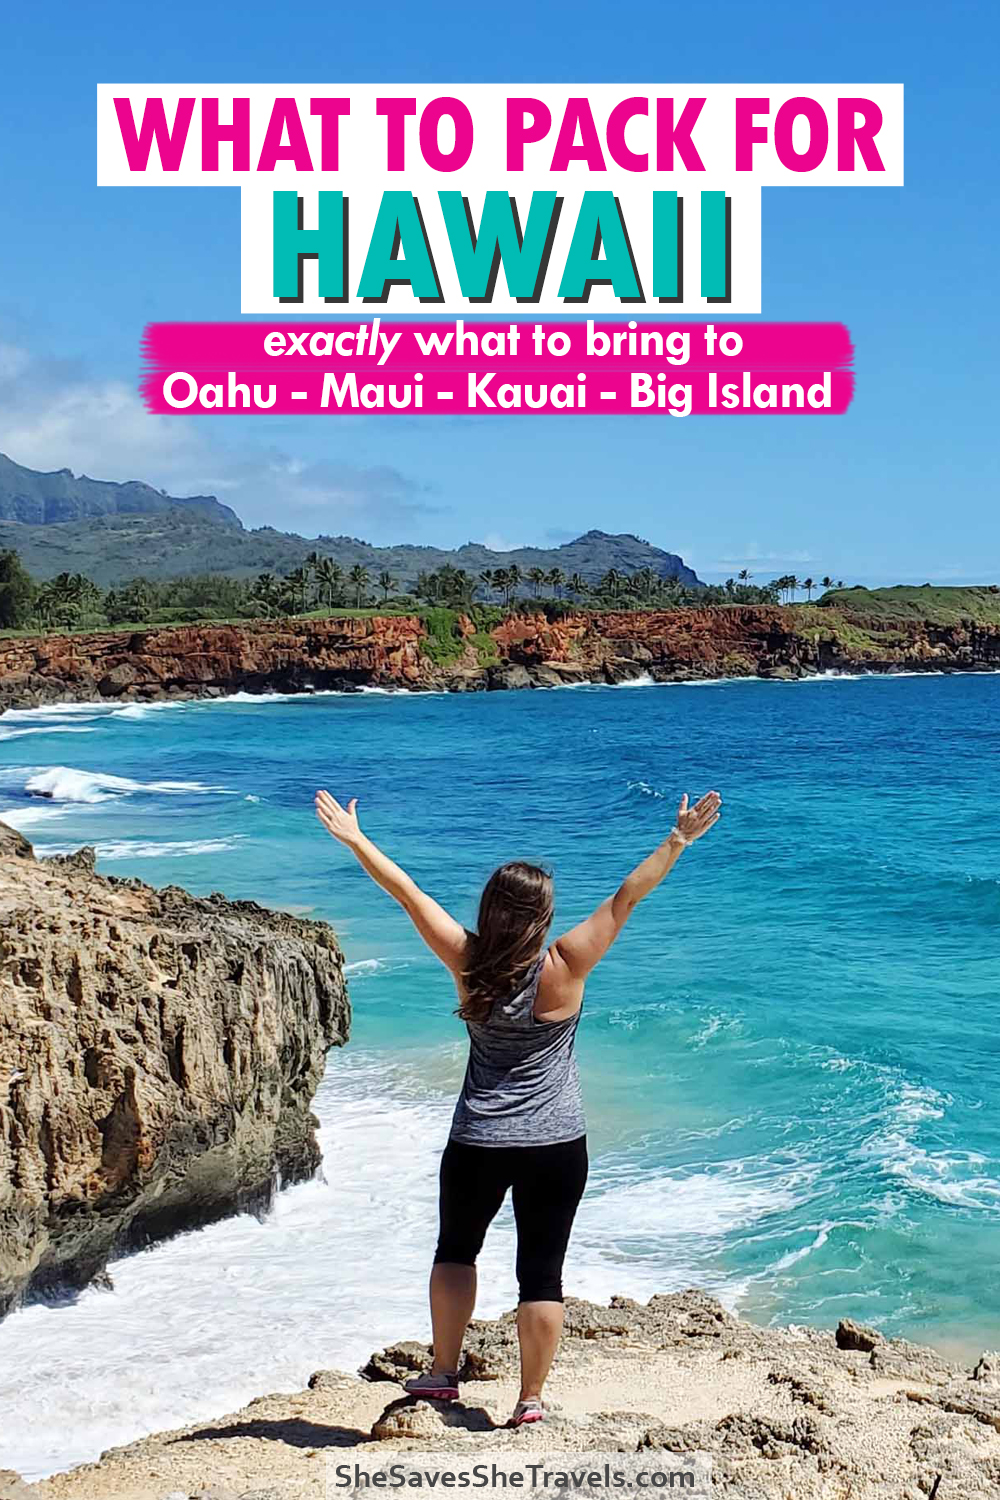 what to pack for Hawaii exactly what bring to Oahu maui kauai big island picture of woman standing along cliff